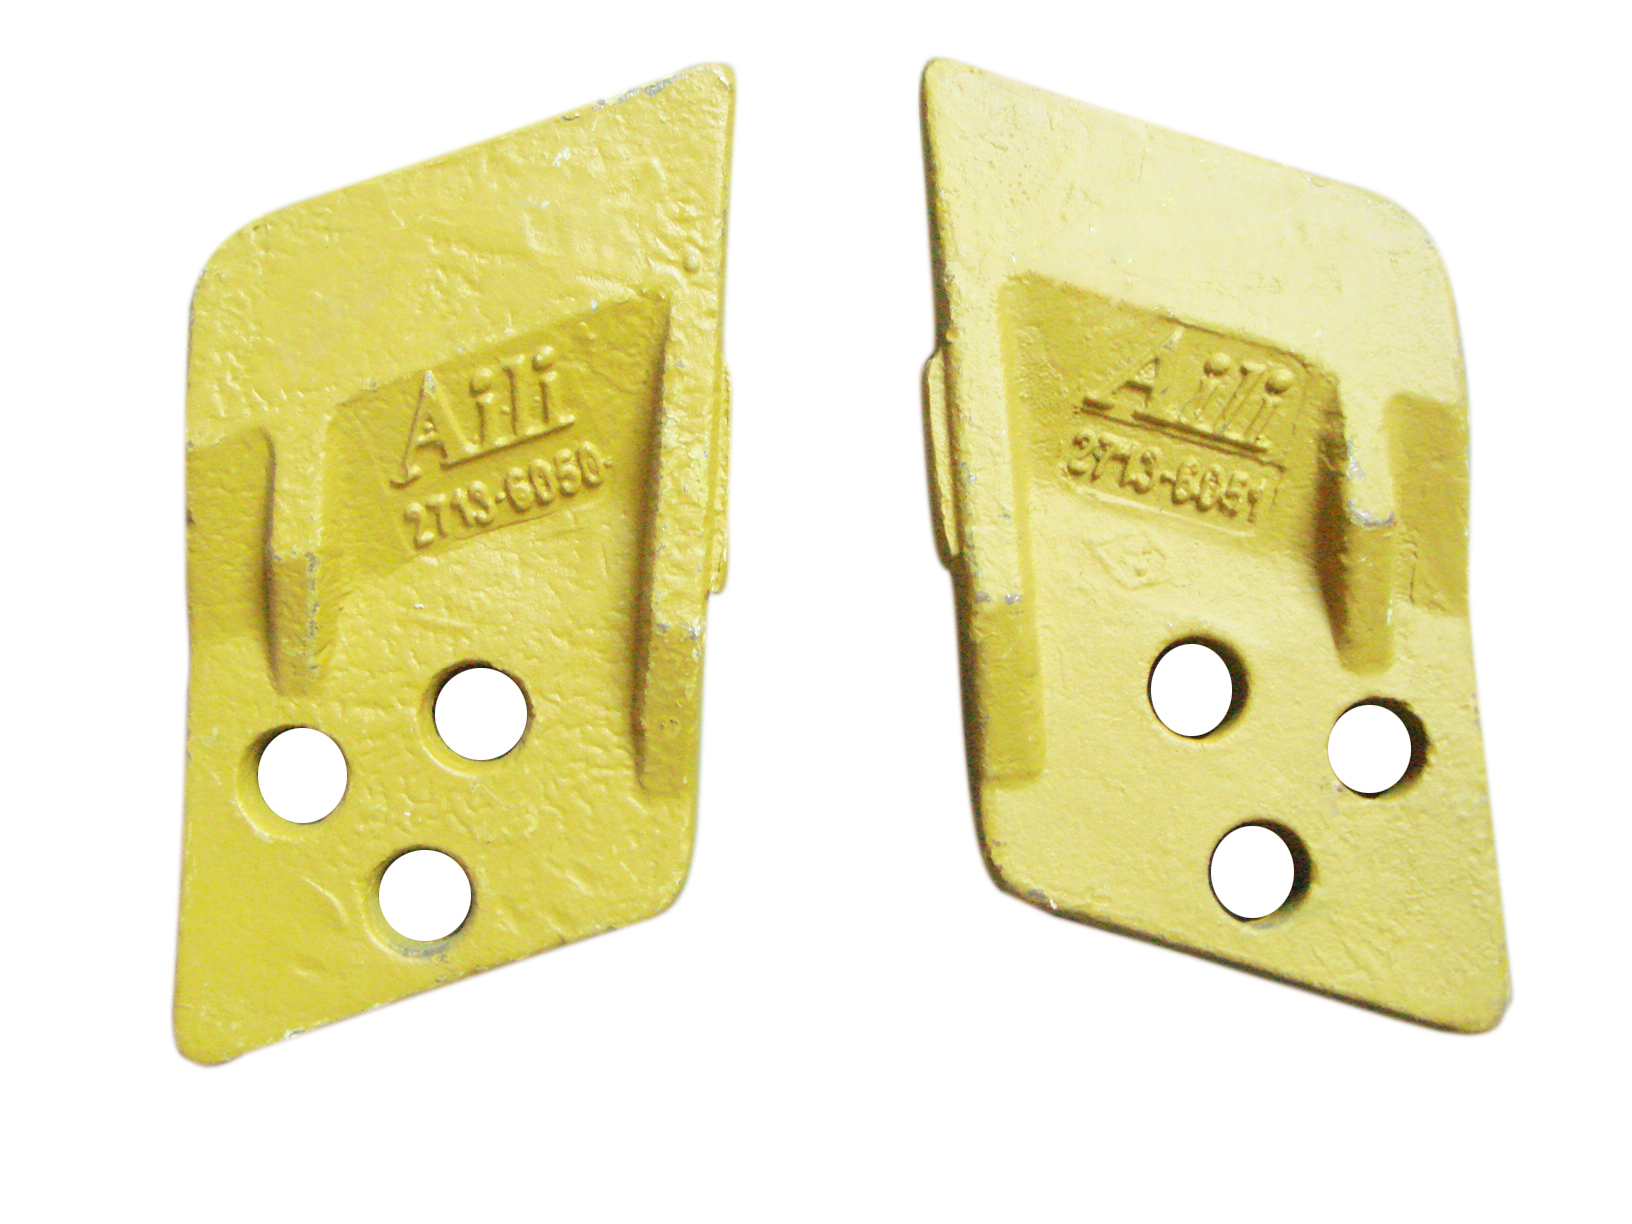 Deawoo 2713-6050 DH55 3-hole Side Cutter Replacement Deawoo S50/S55-5 Bolt-On Side Cutters